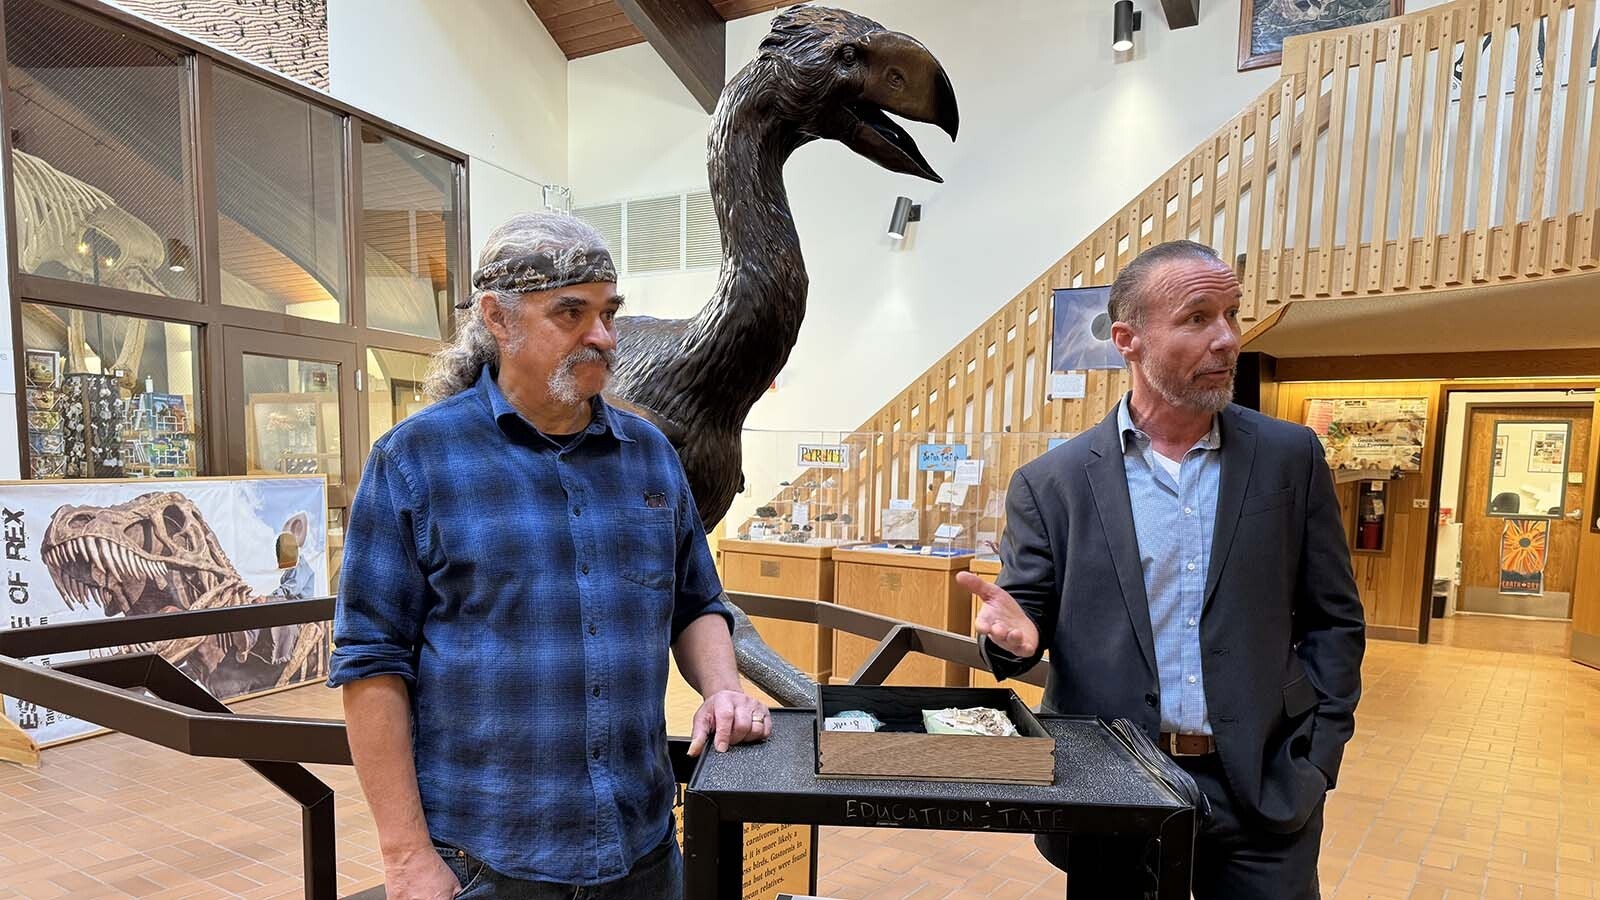 J.P Cavigelli of the Tate Geological Museum at Casper College, left, and Travis Starr of the U.S. Department of Homeland Security at a ceremony donating an Asian Psittacosaurus fossil to the museum.